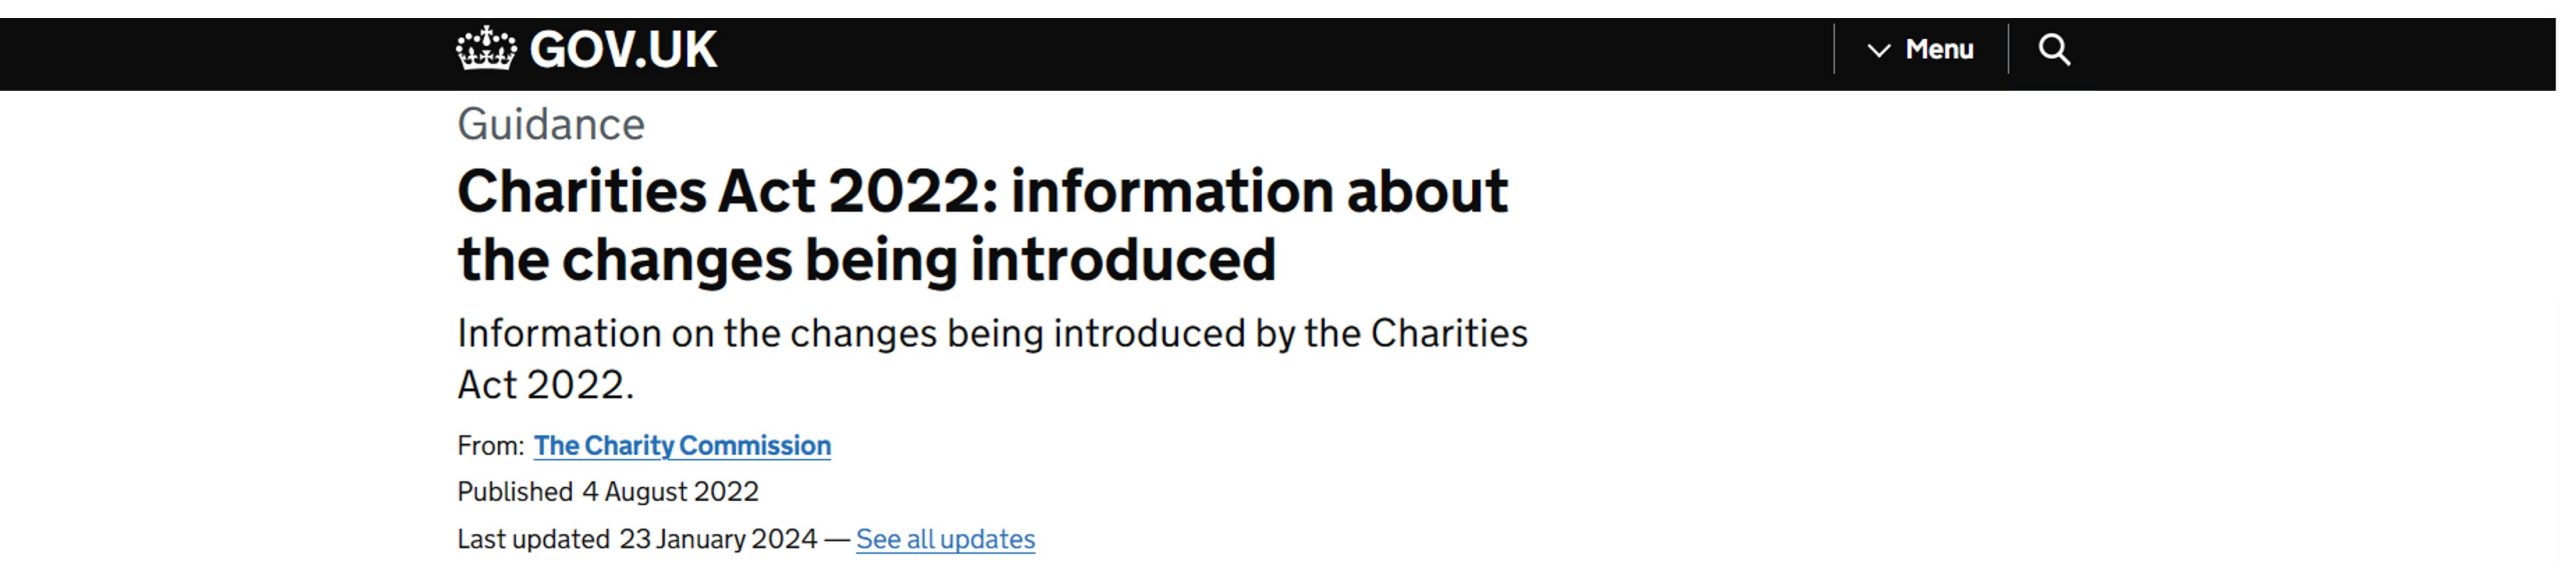 Latest changes to Charities Act 2022